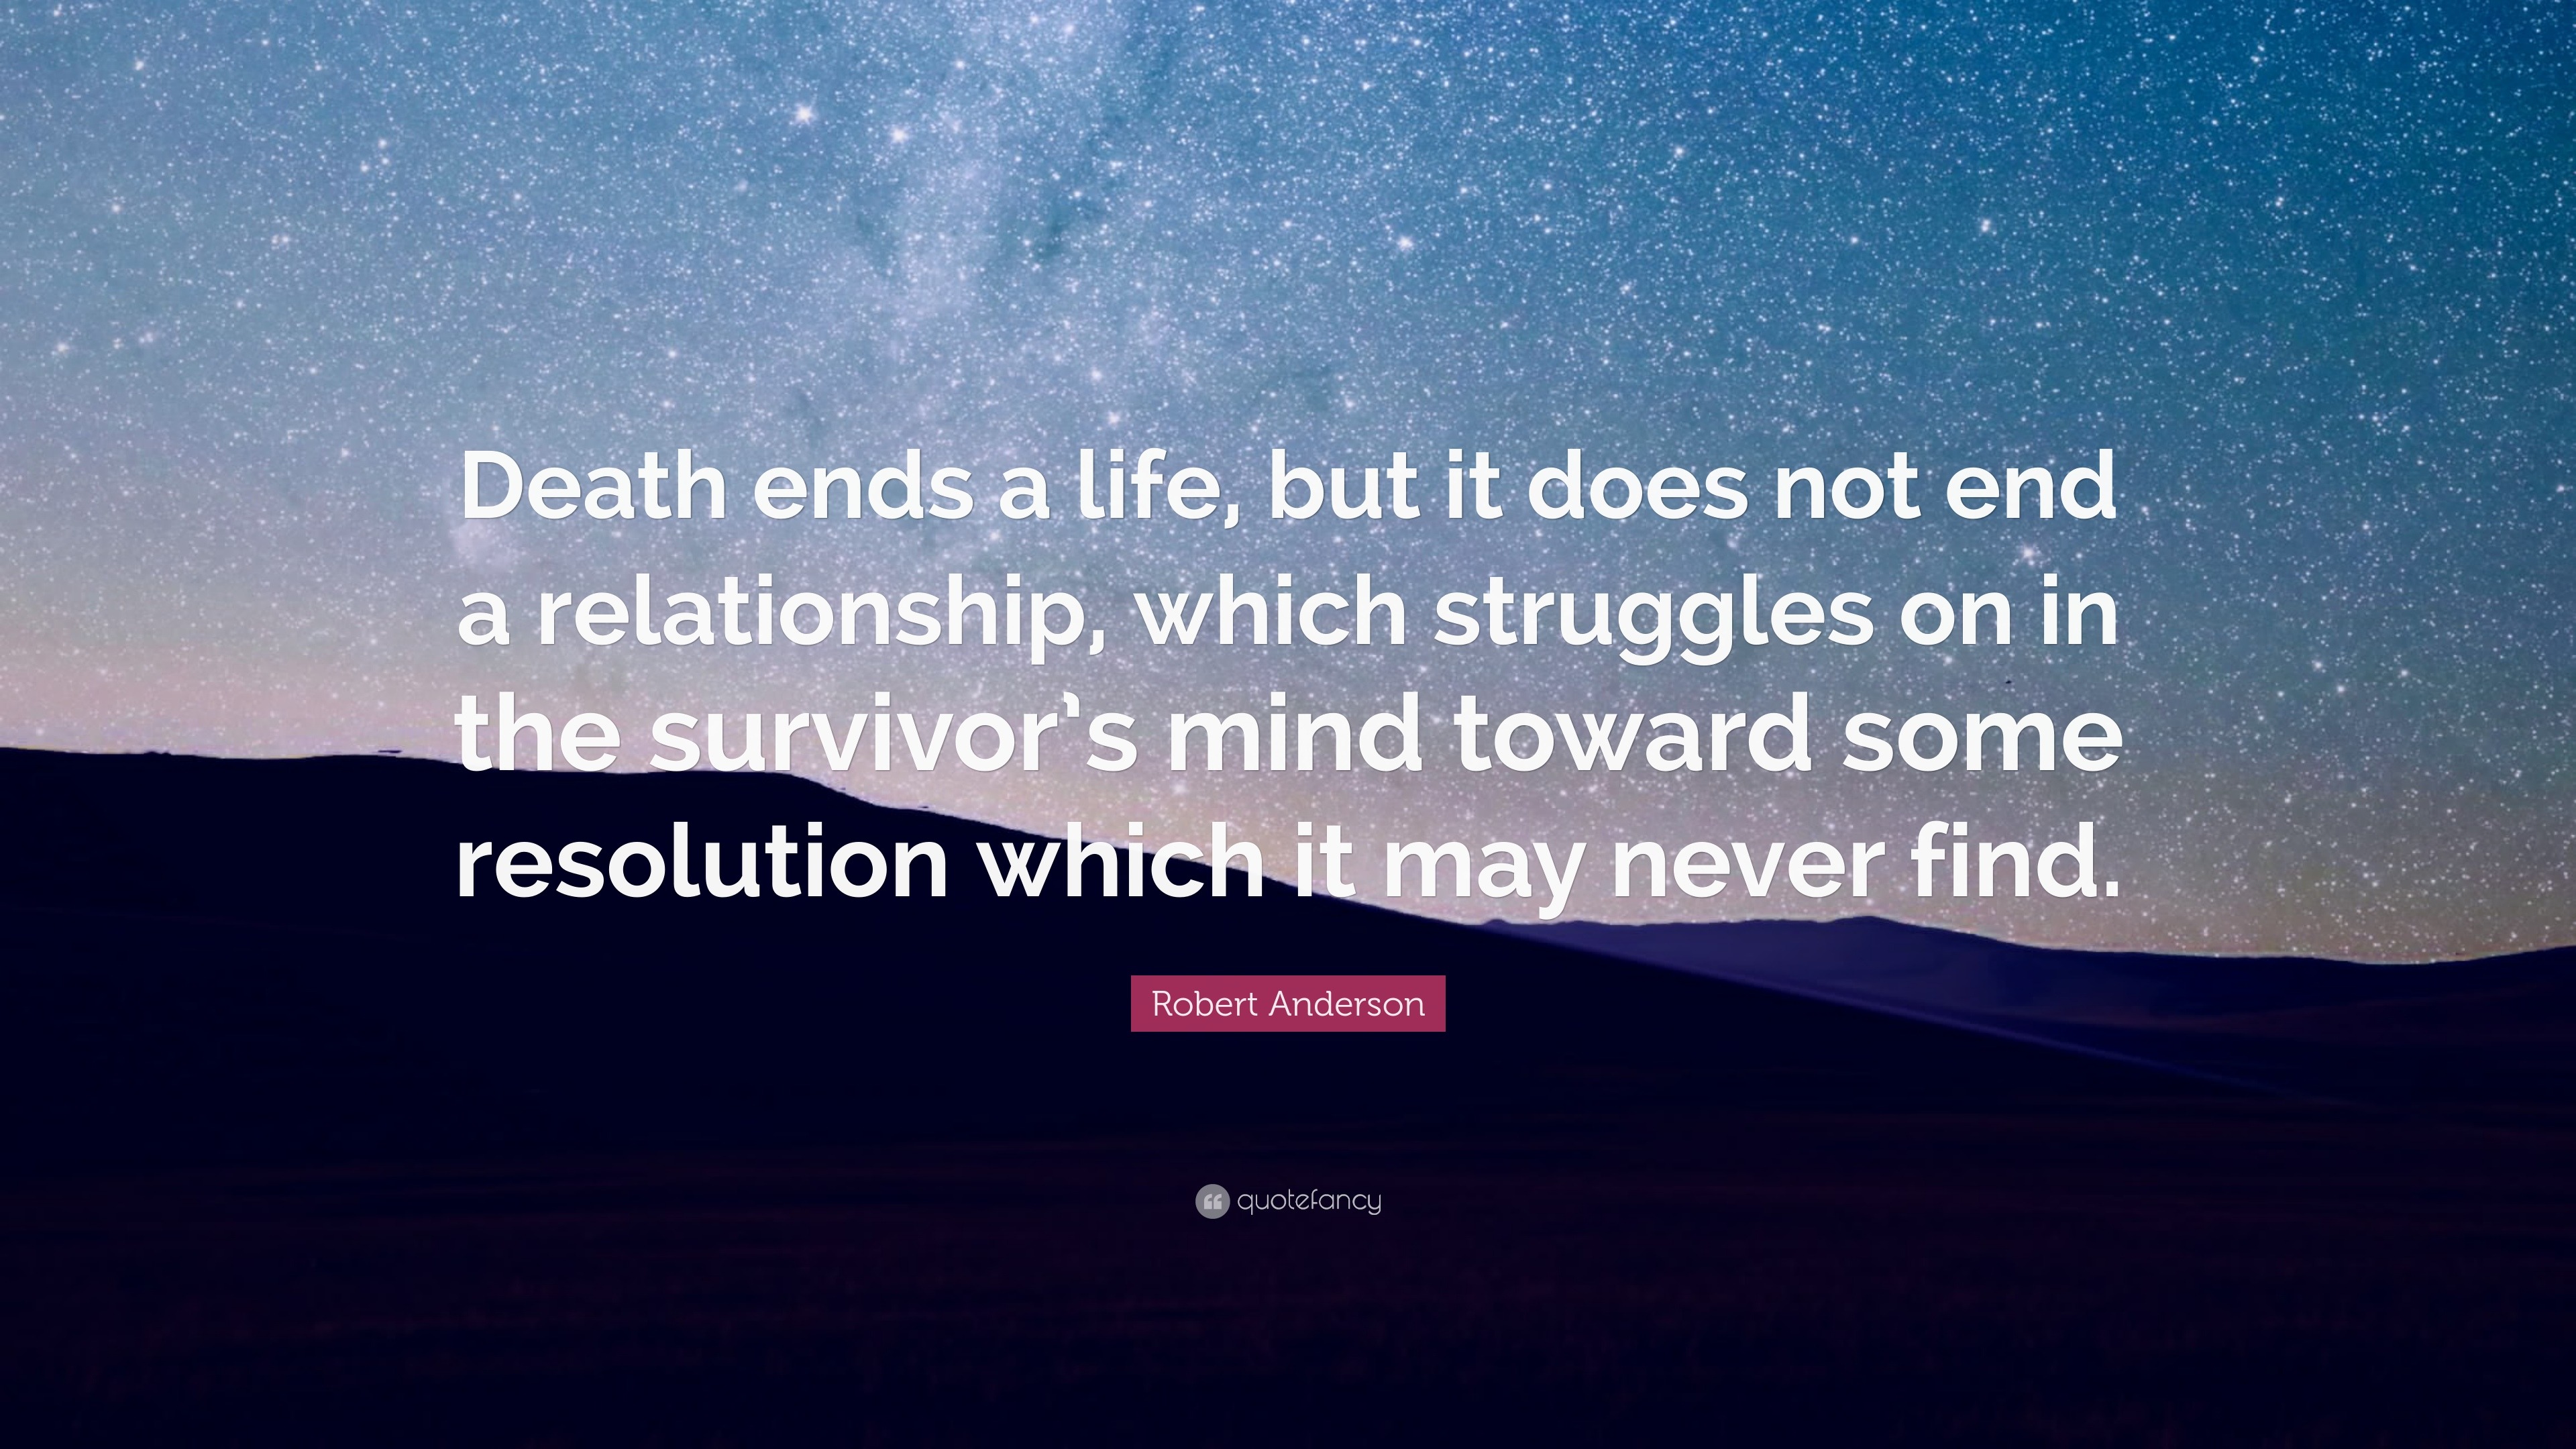 Robert Anderson Quote “Death ends a life but it does not end a